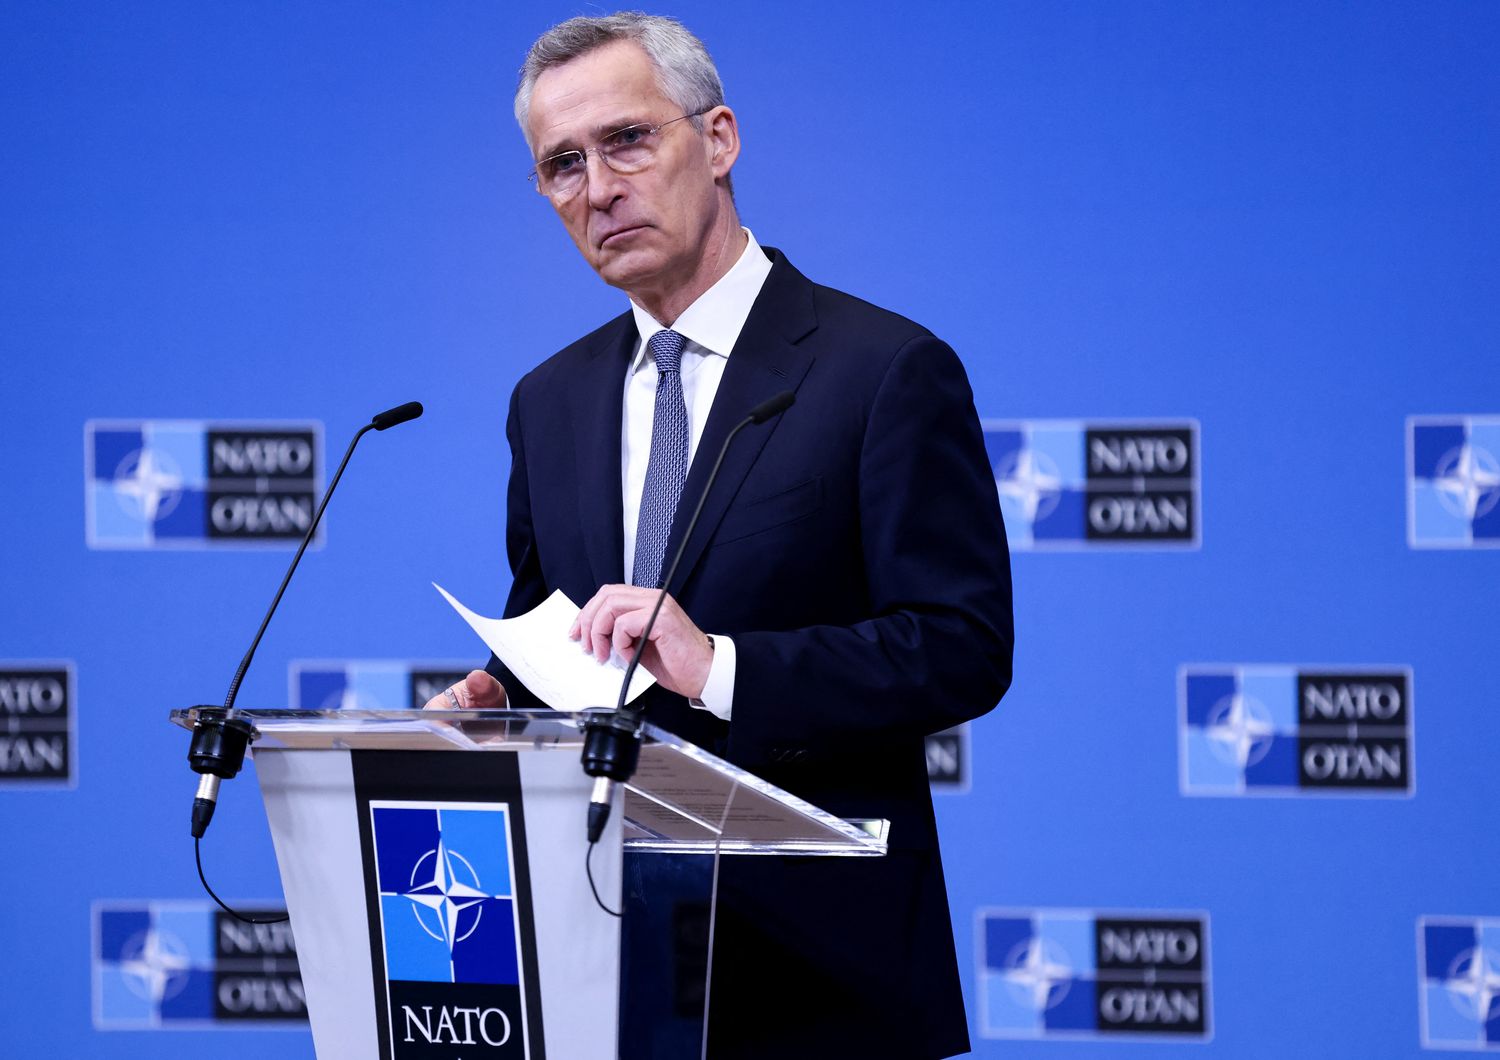 Jens Stoltenberg in conferenza stampa a Bruxelles &nbsp;